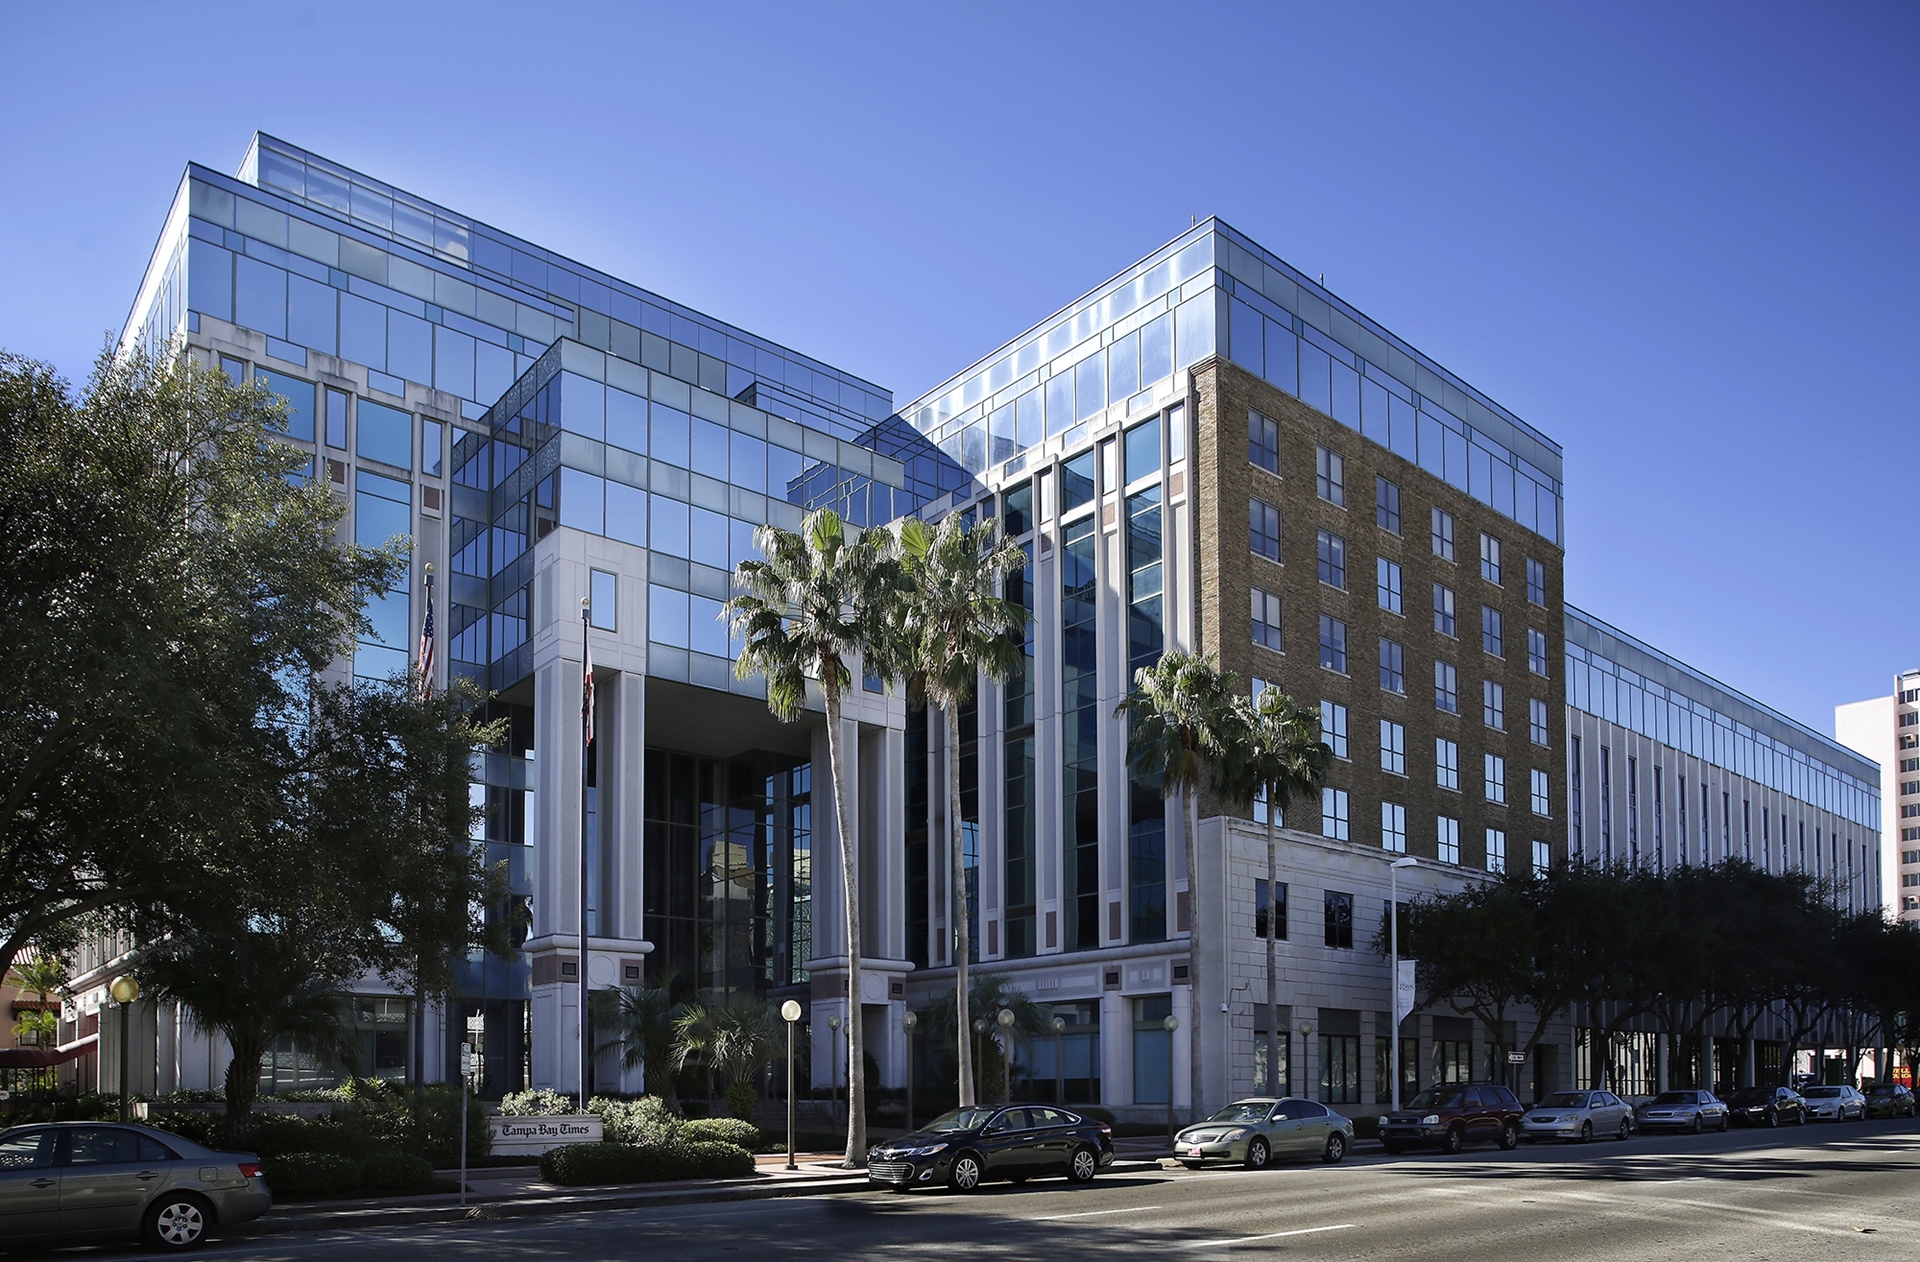 COURTESY PHOTO — As a result of $13 million in improvements, occupancy at 490 First Ave. South in St. Petersburg jumped from 46% to more than 90%.